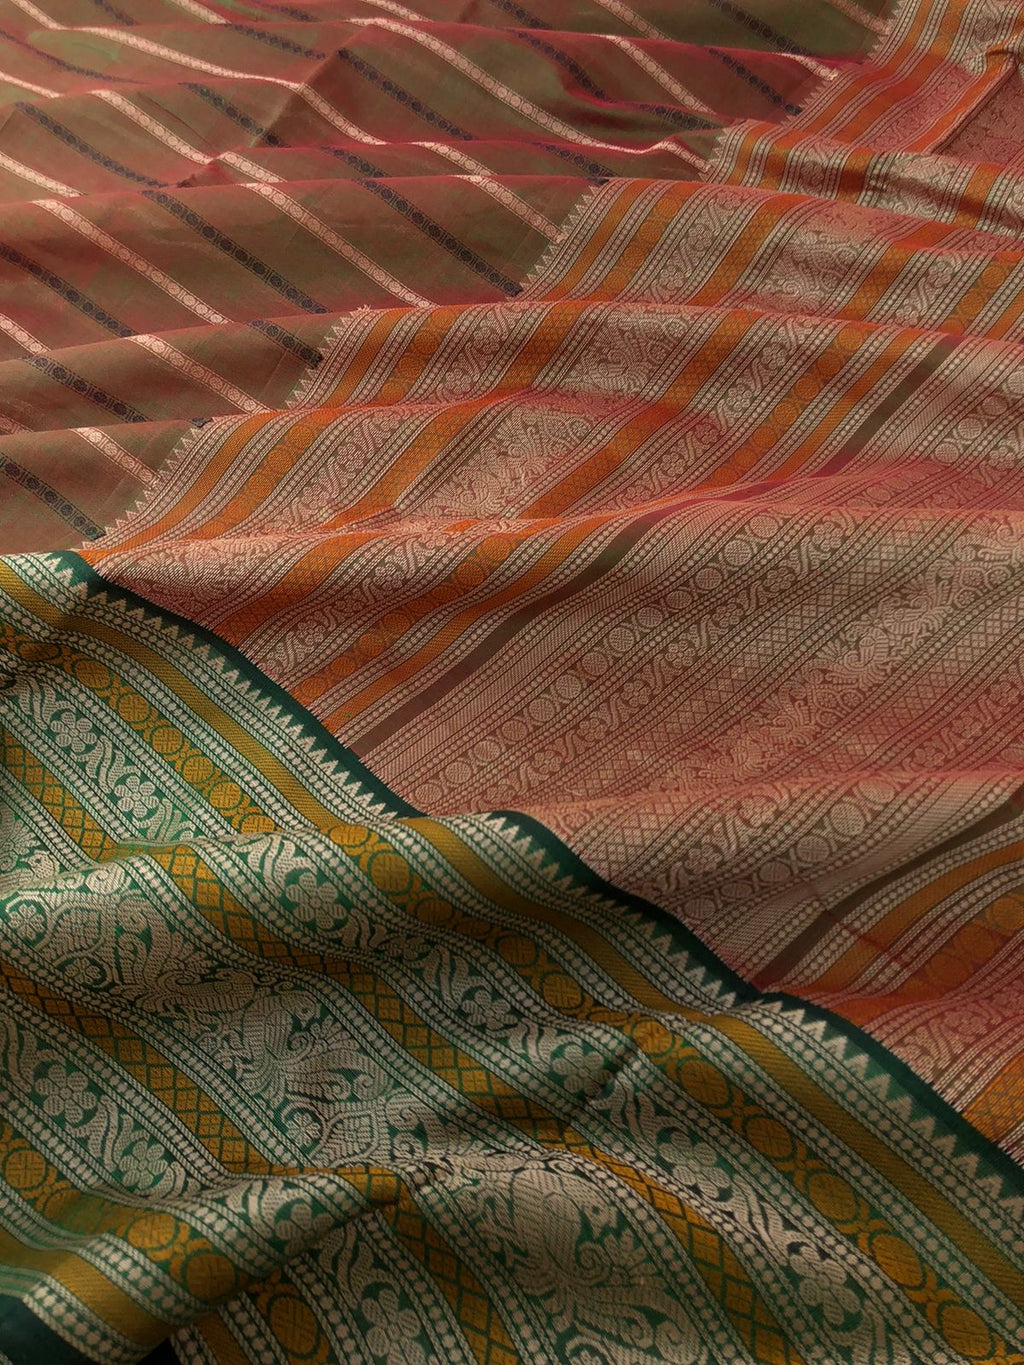 Woven Motifs Silk Cottons - a gorgeous perfect red short green manthulir veldhari with intricate woven borders